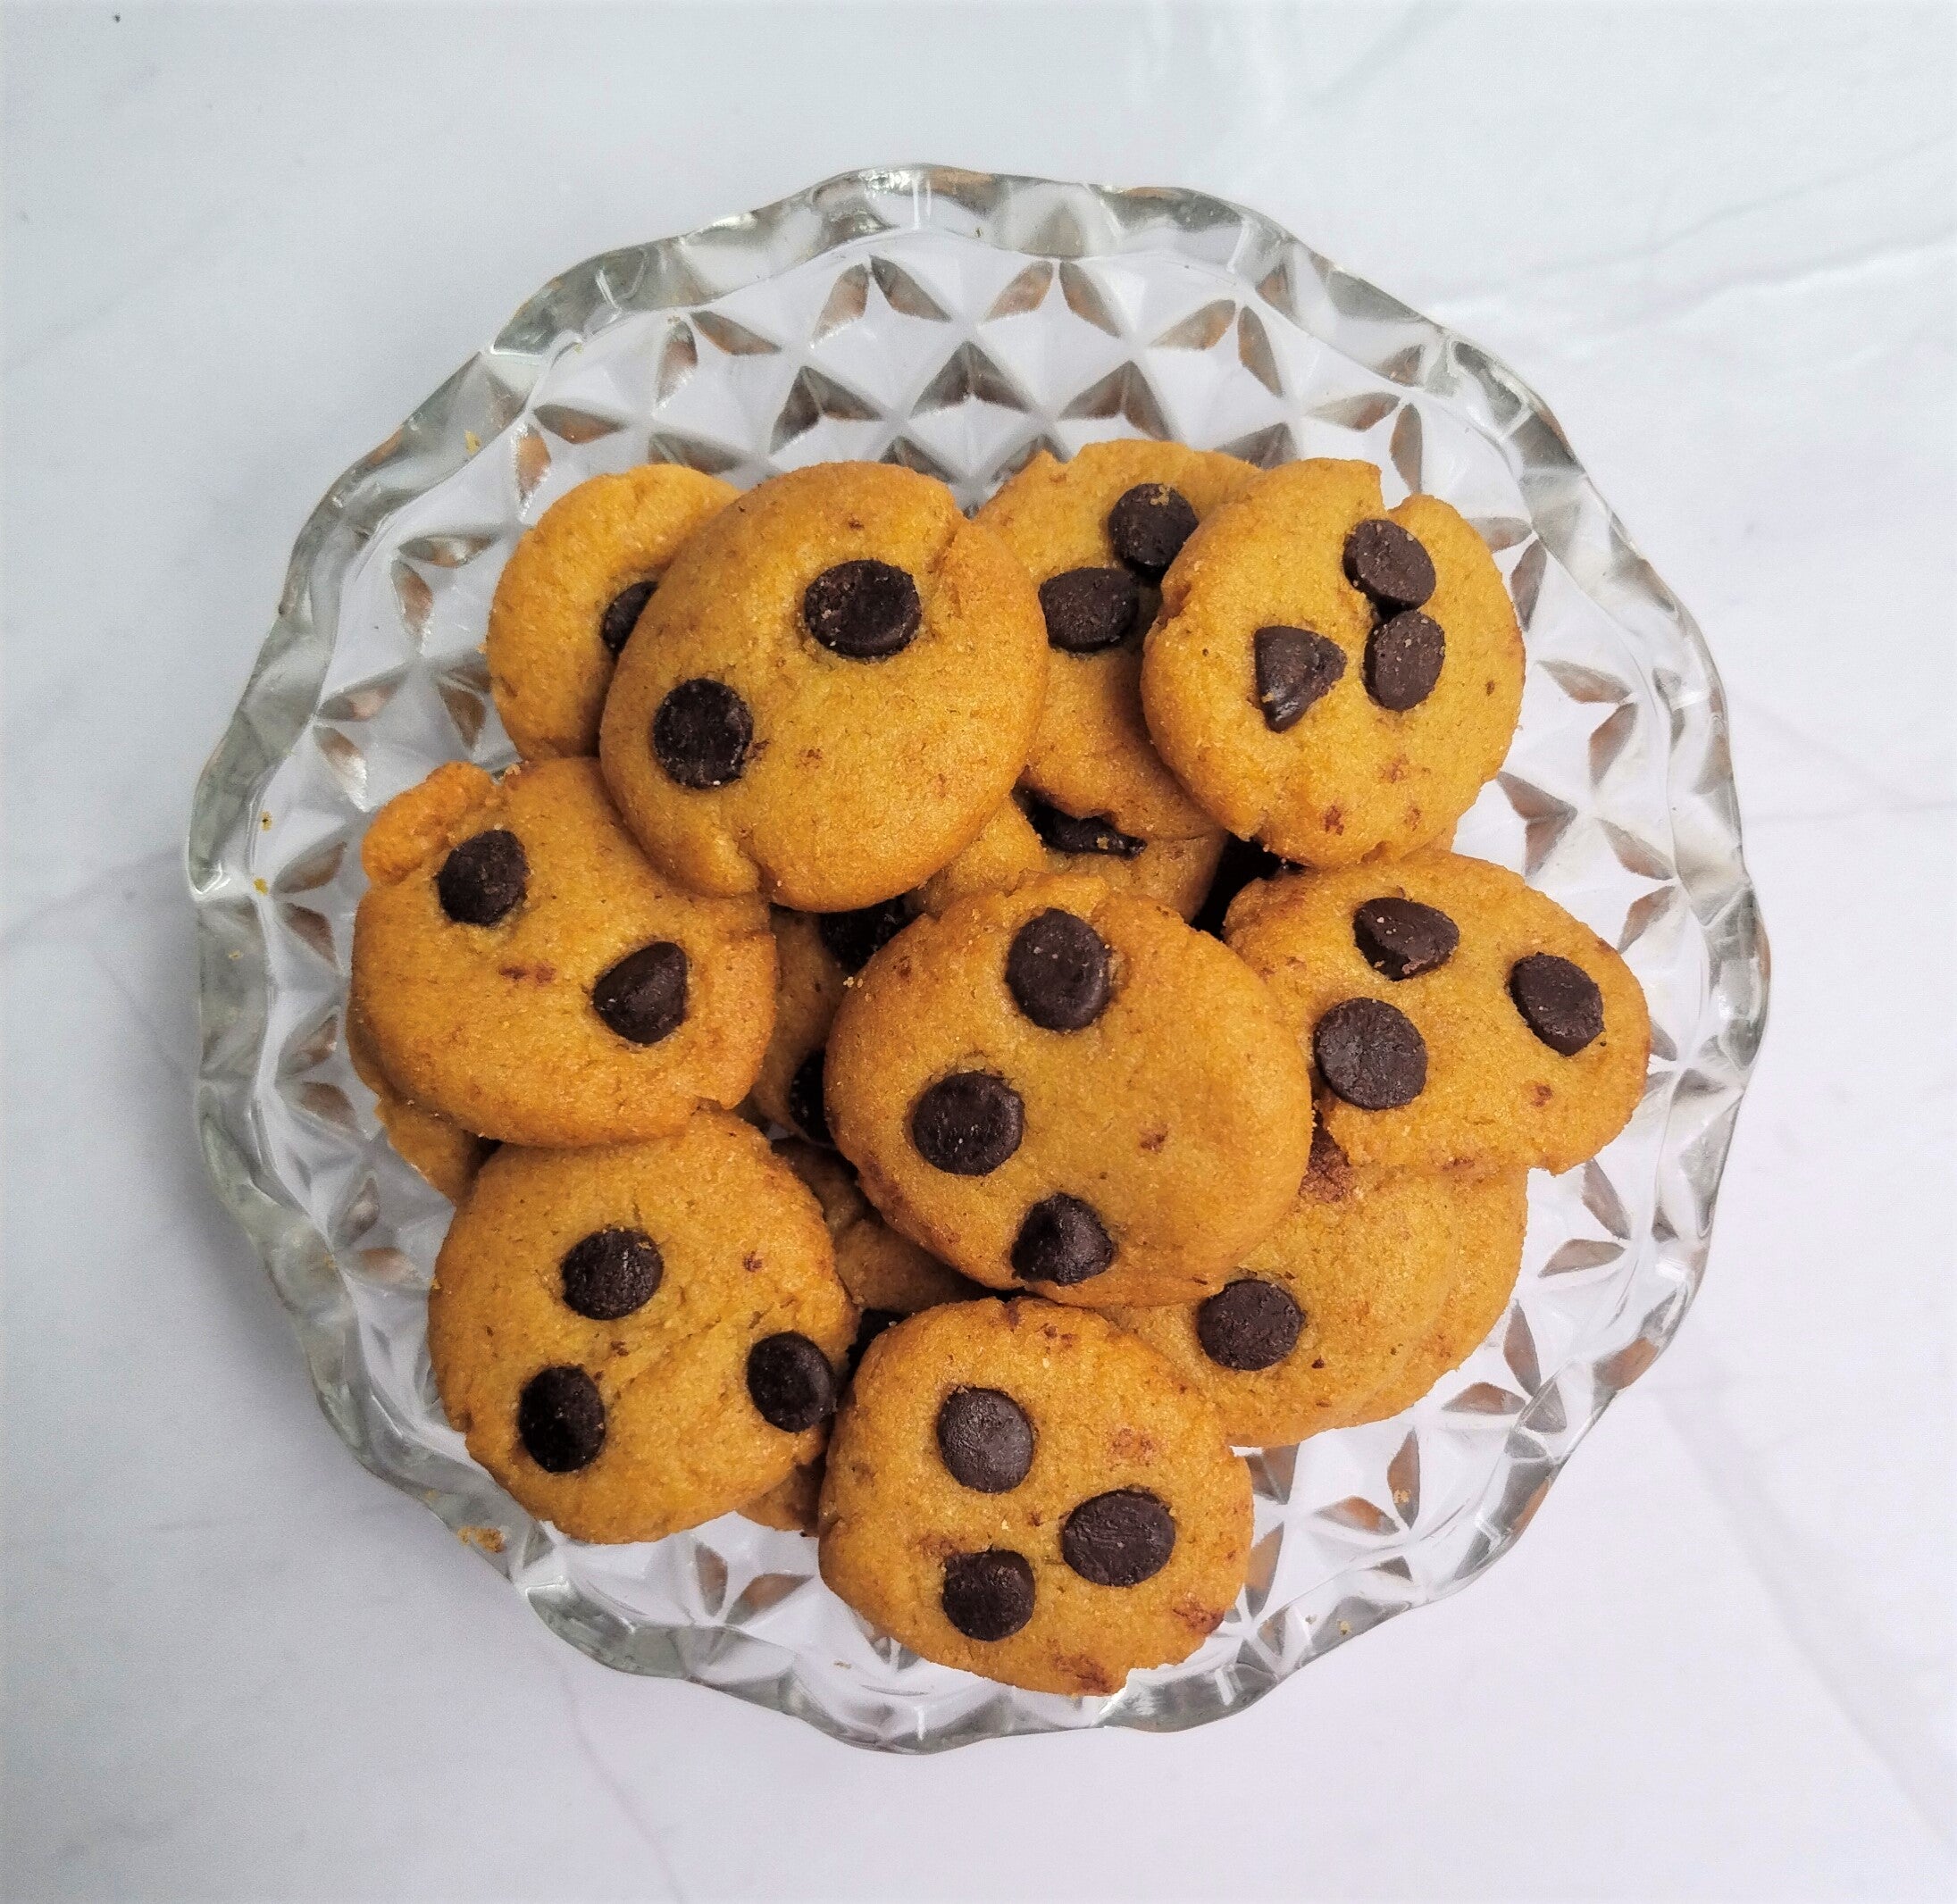 100% Whole Wheat Chocolate Chip Cookies | Refined Sugar-Free | Eggless | No Maida | No Preservatives | Fibre Rich | 180g x 2 Pack